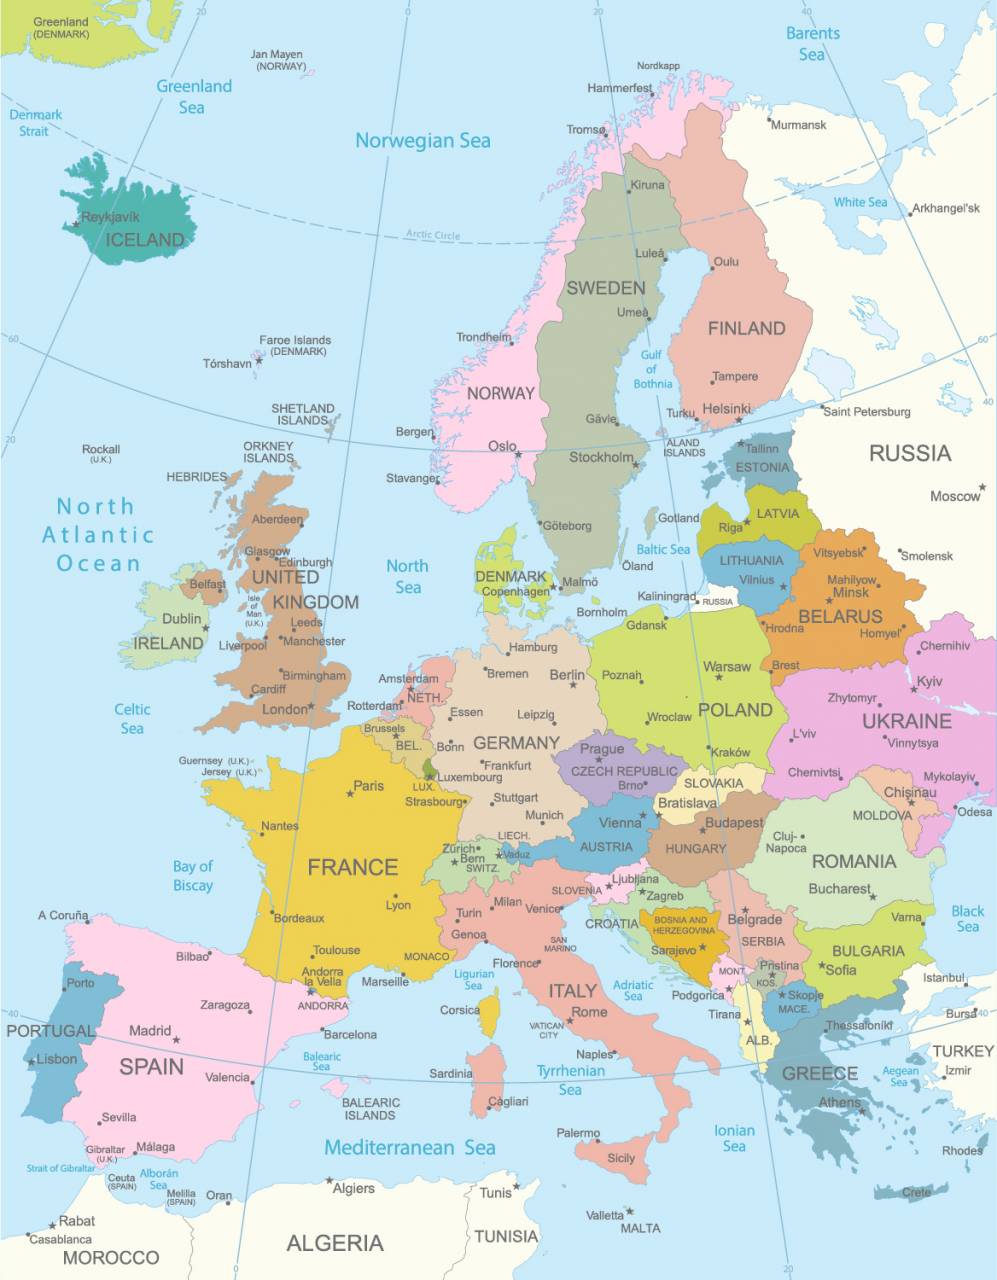 Europe-very detailed map